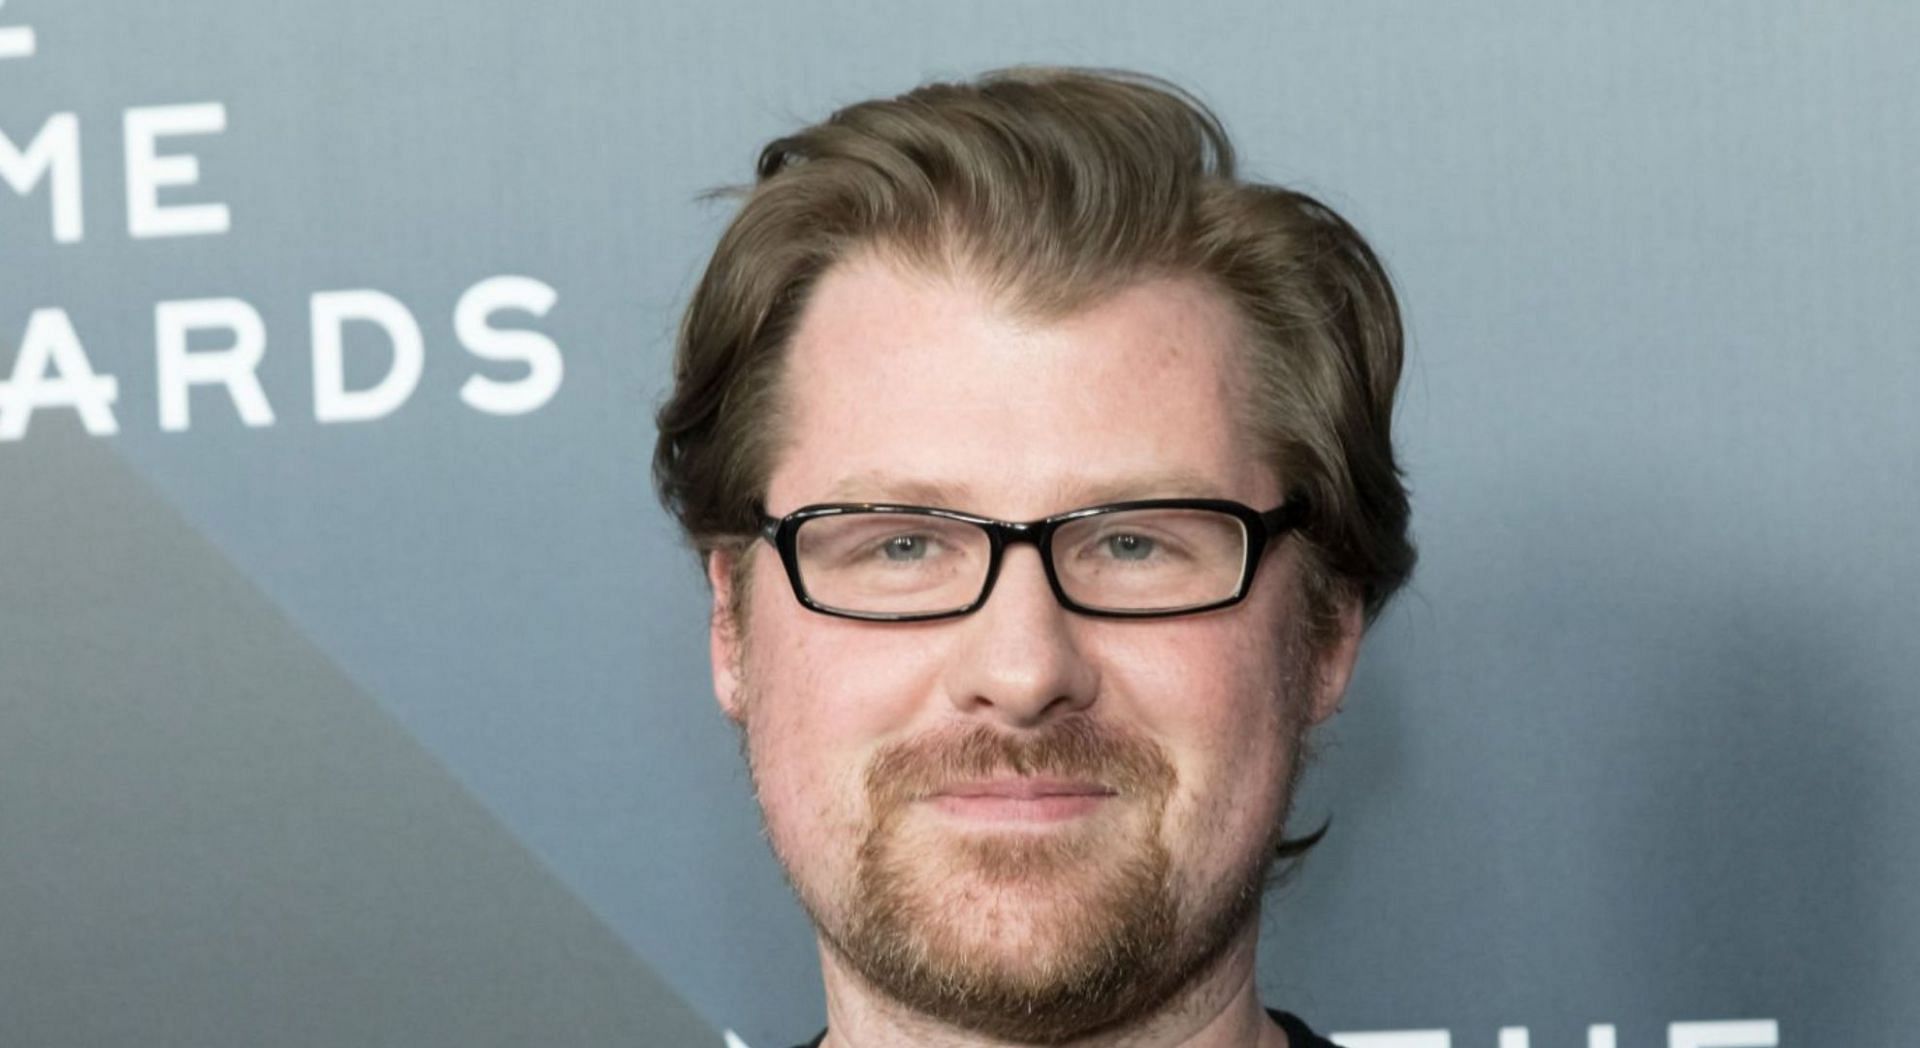 Social media users alleged that Justin Roiland